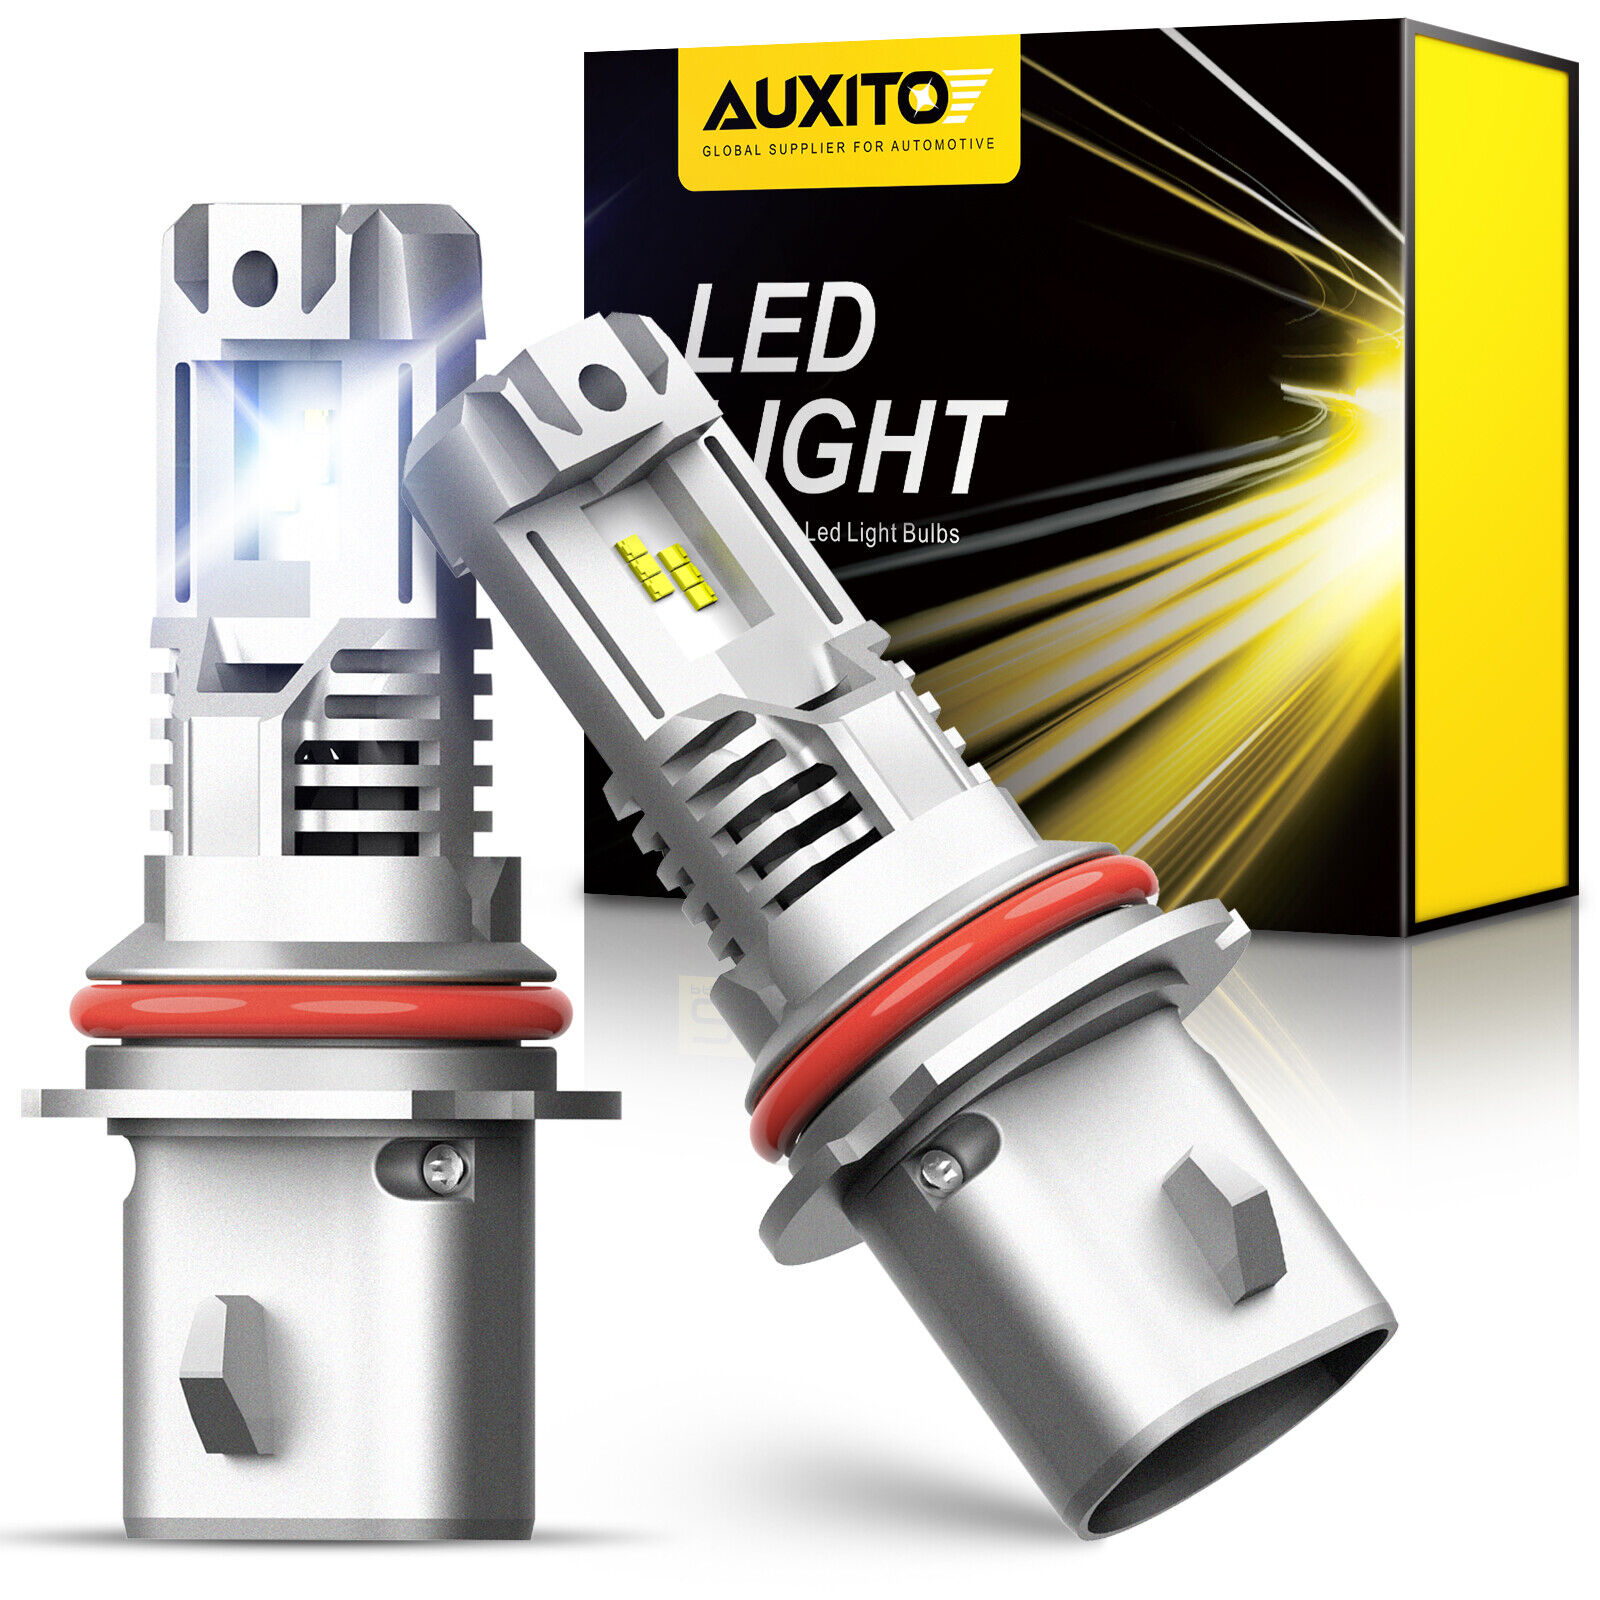 AUXITO 9004 HB1 LED Headlight Super Bright Bulbs Kit White 12000LM High/Low Beam